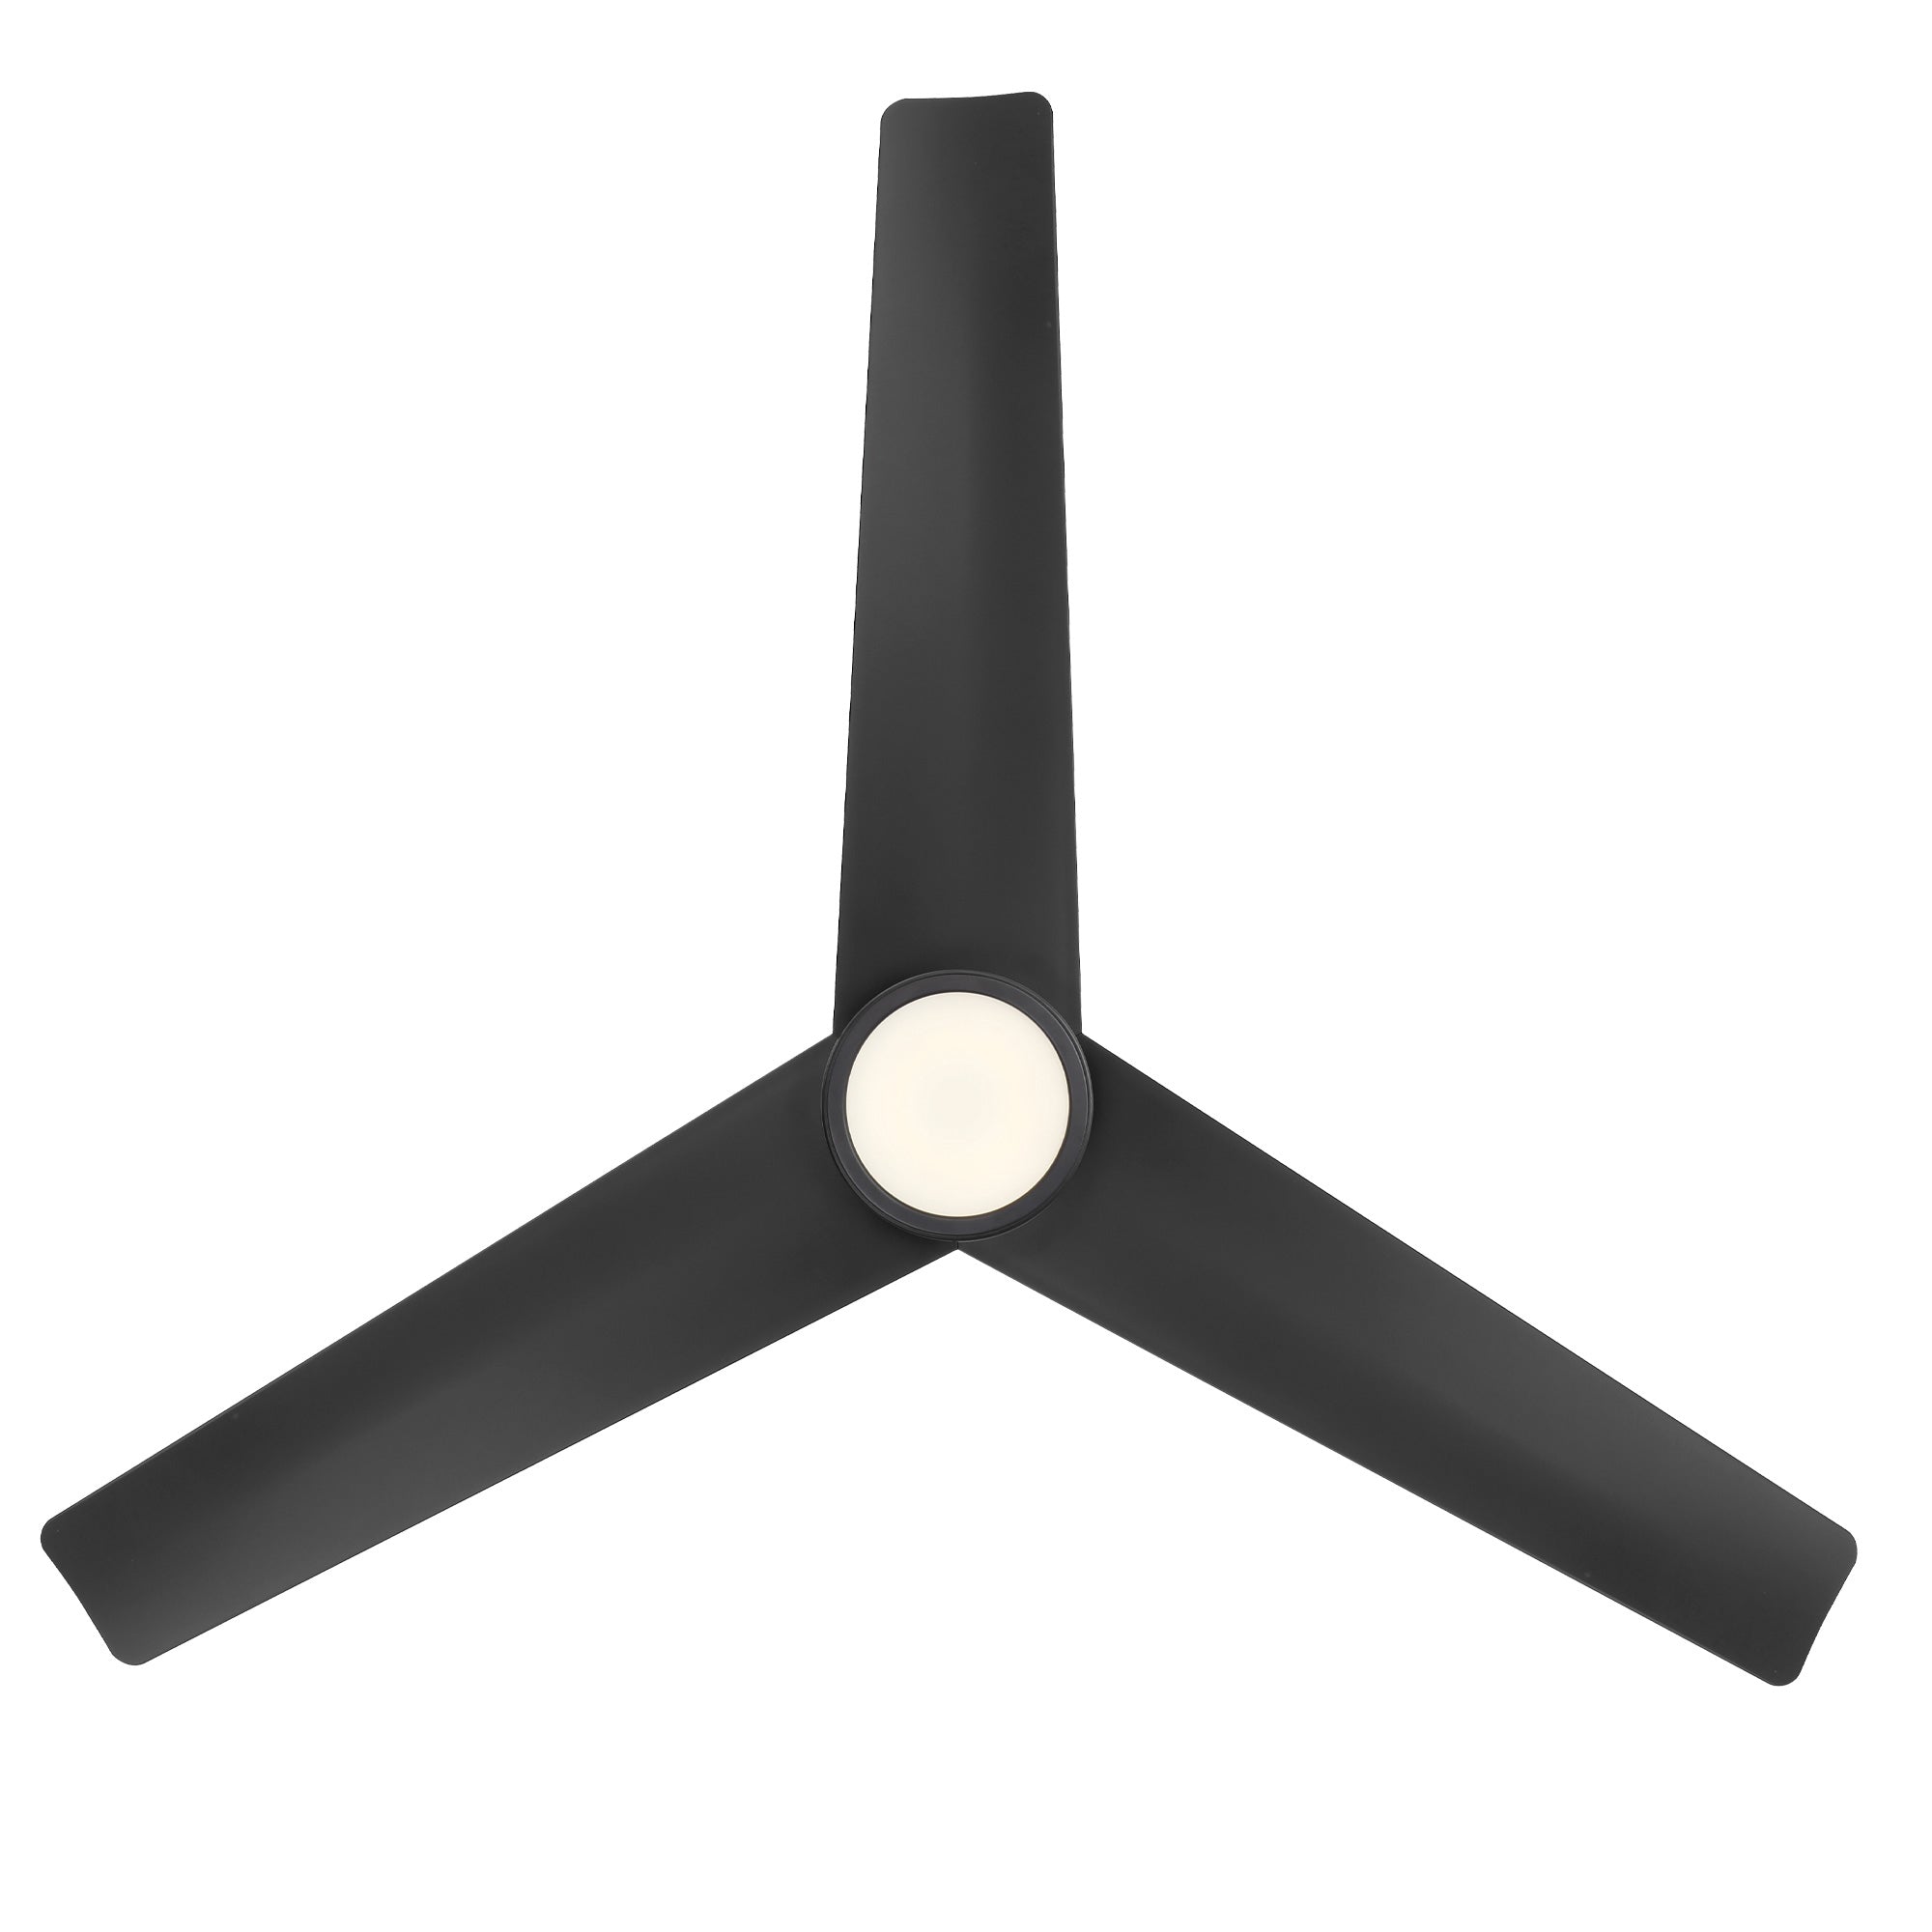 Lotus Indoor/Outdoor 3-Blade 54" Smart Ceiling Fan with LED Light Kit and Remote Control